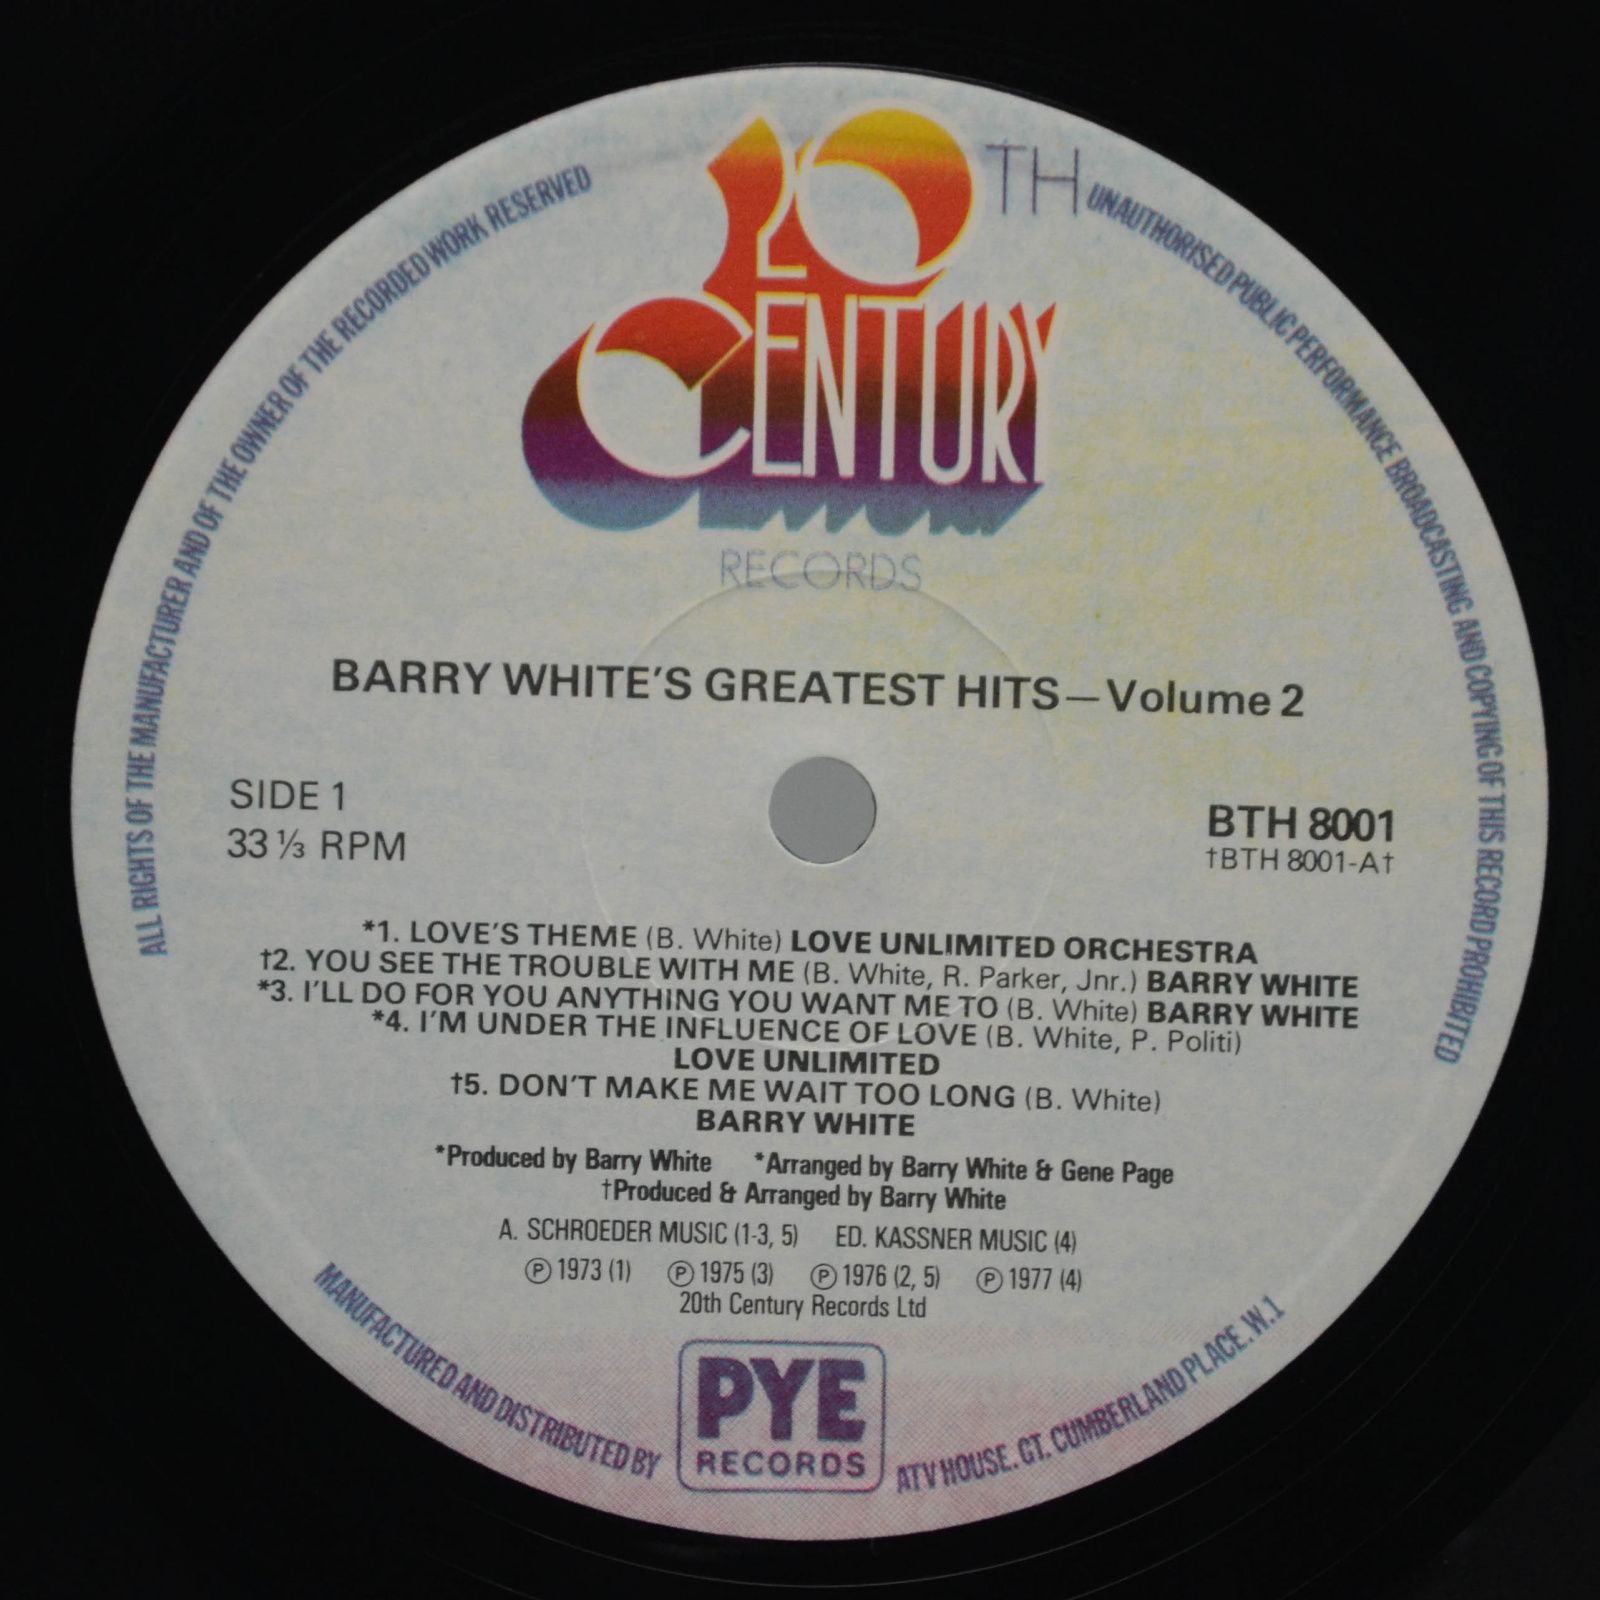 Barry White — Greatest Hits Volume Two (UK), 1977